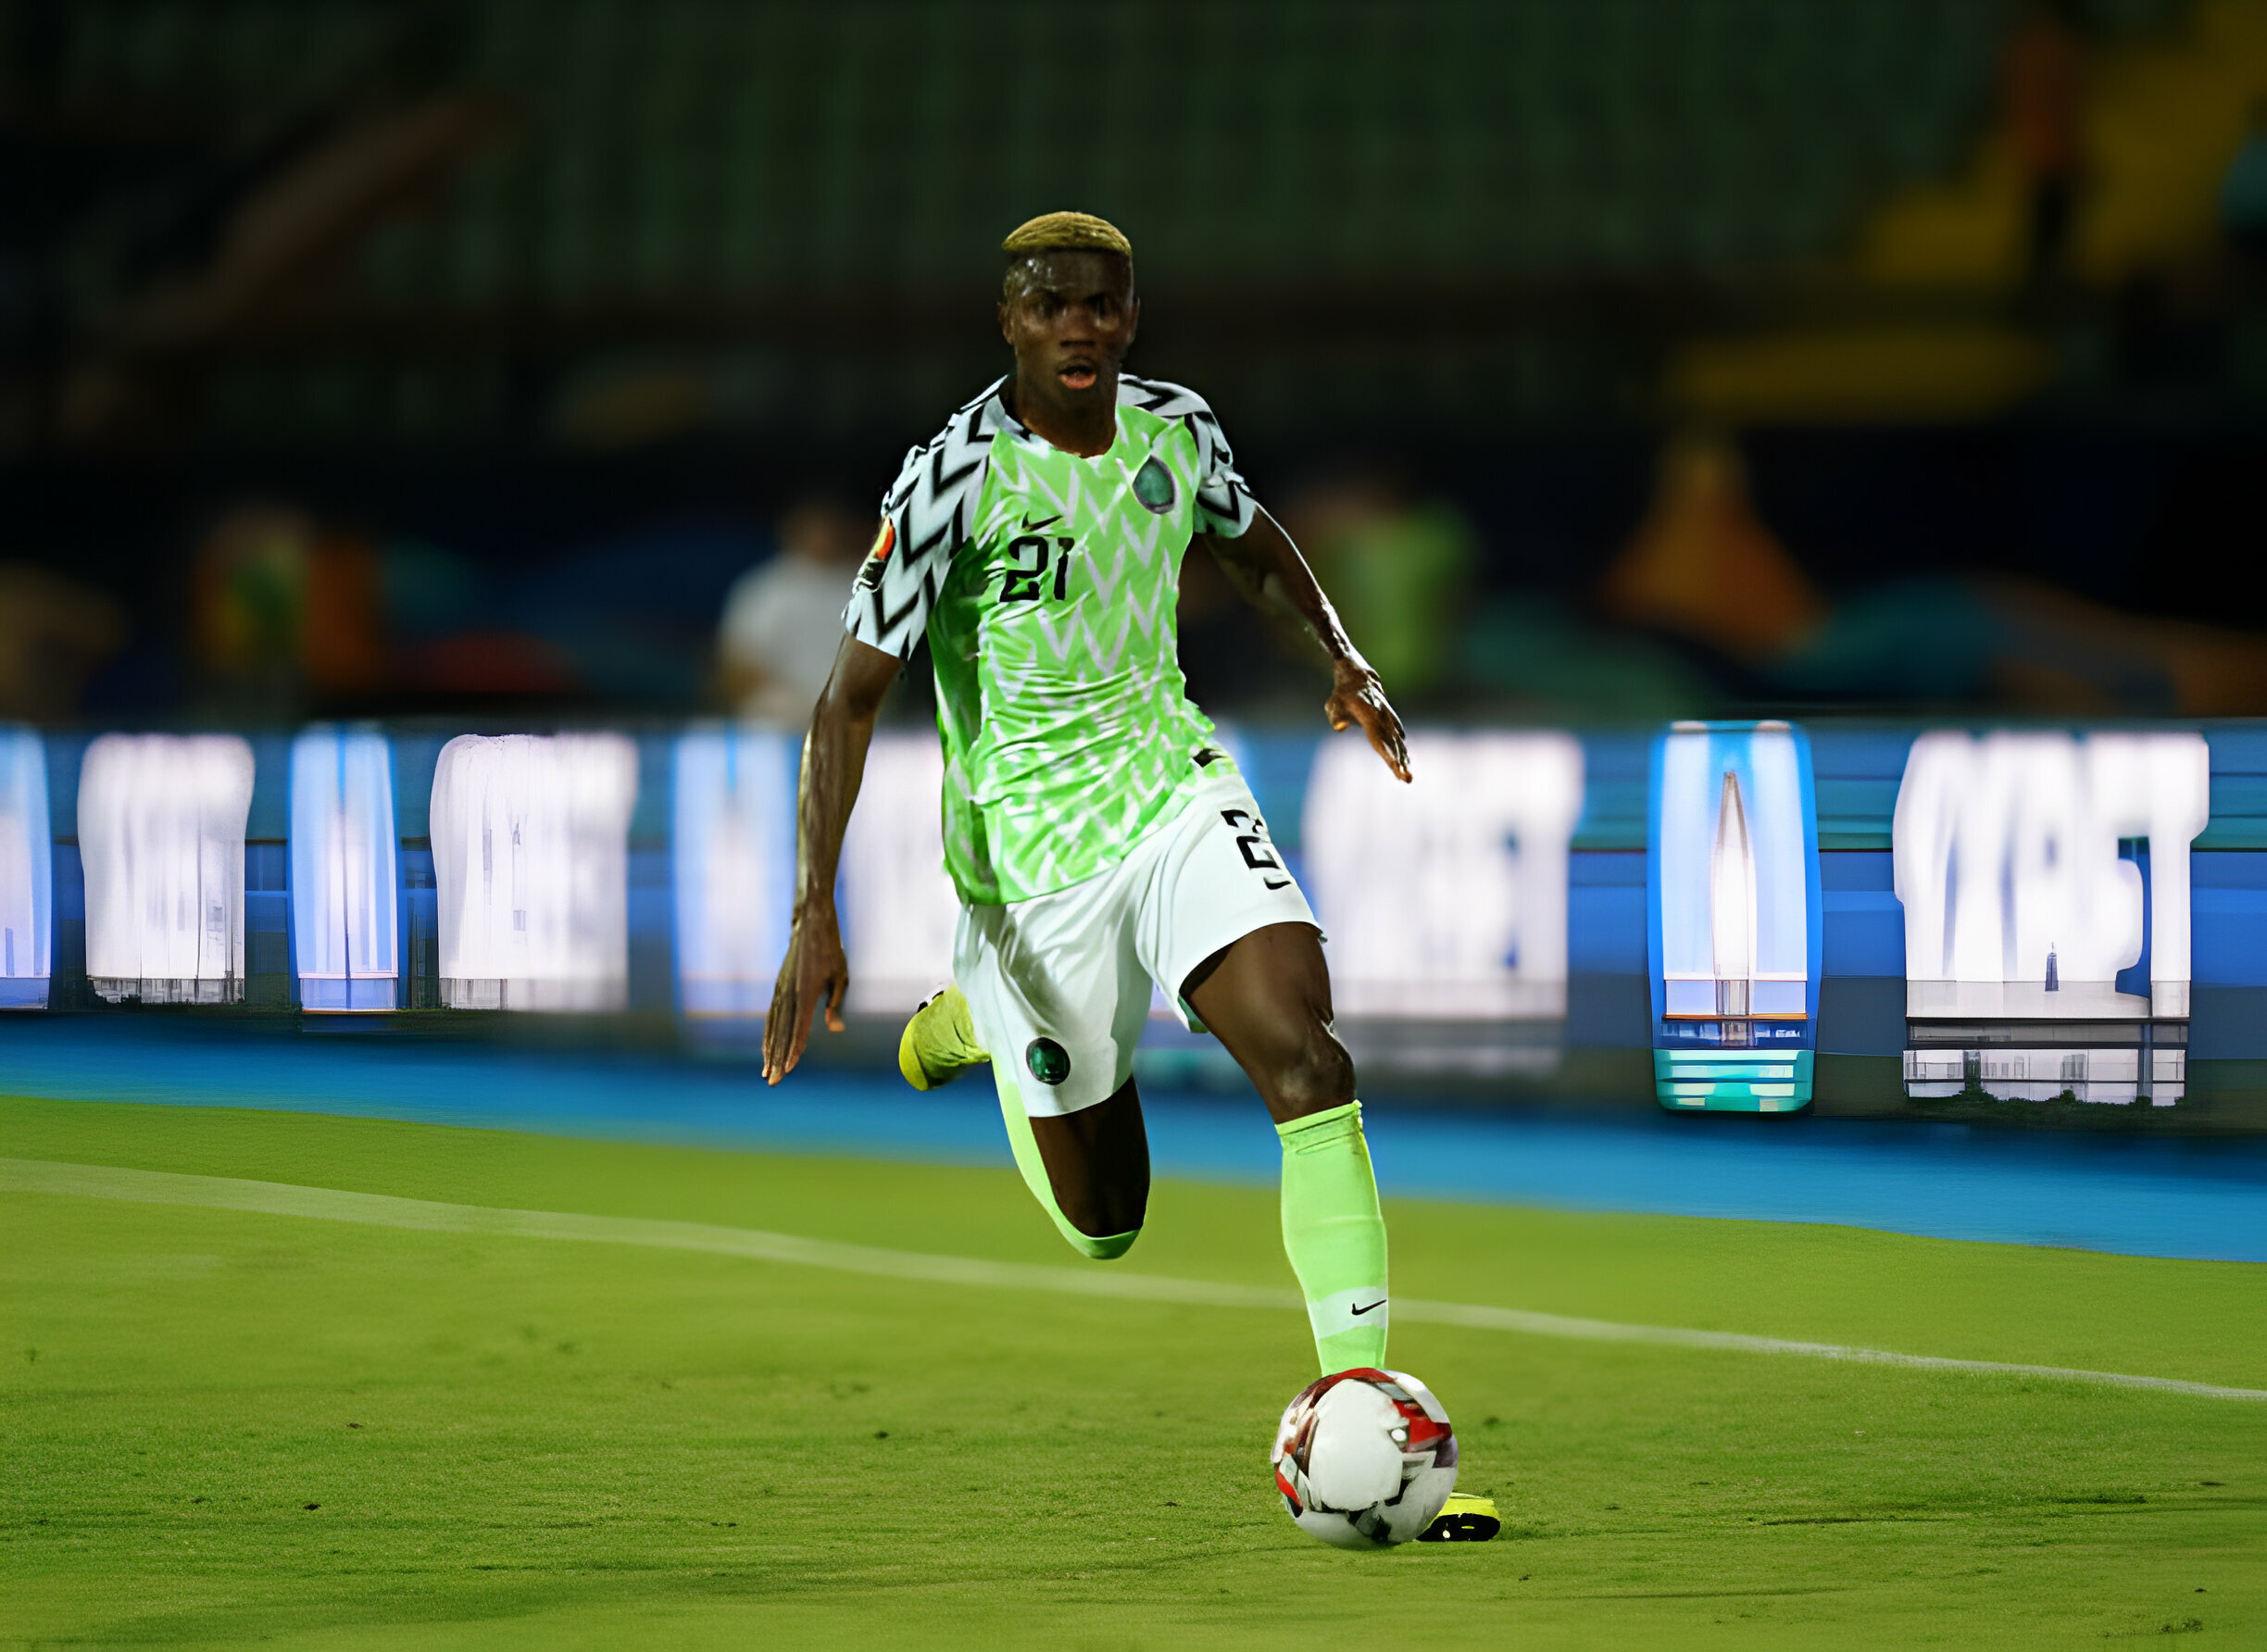 AFCON 2023: Meet the 11 soccer stars ready to light up Ivory Coast